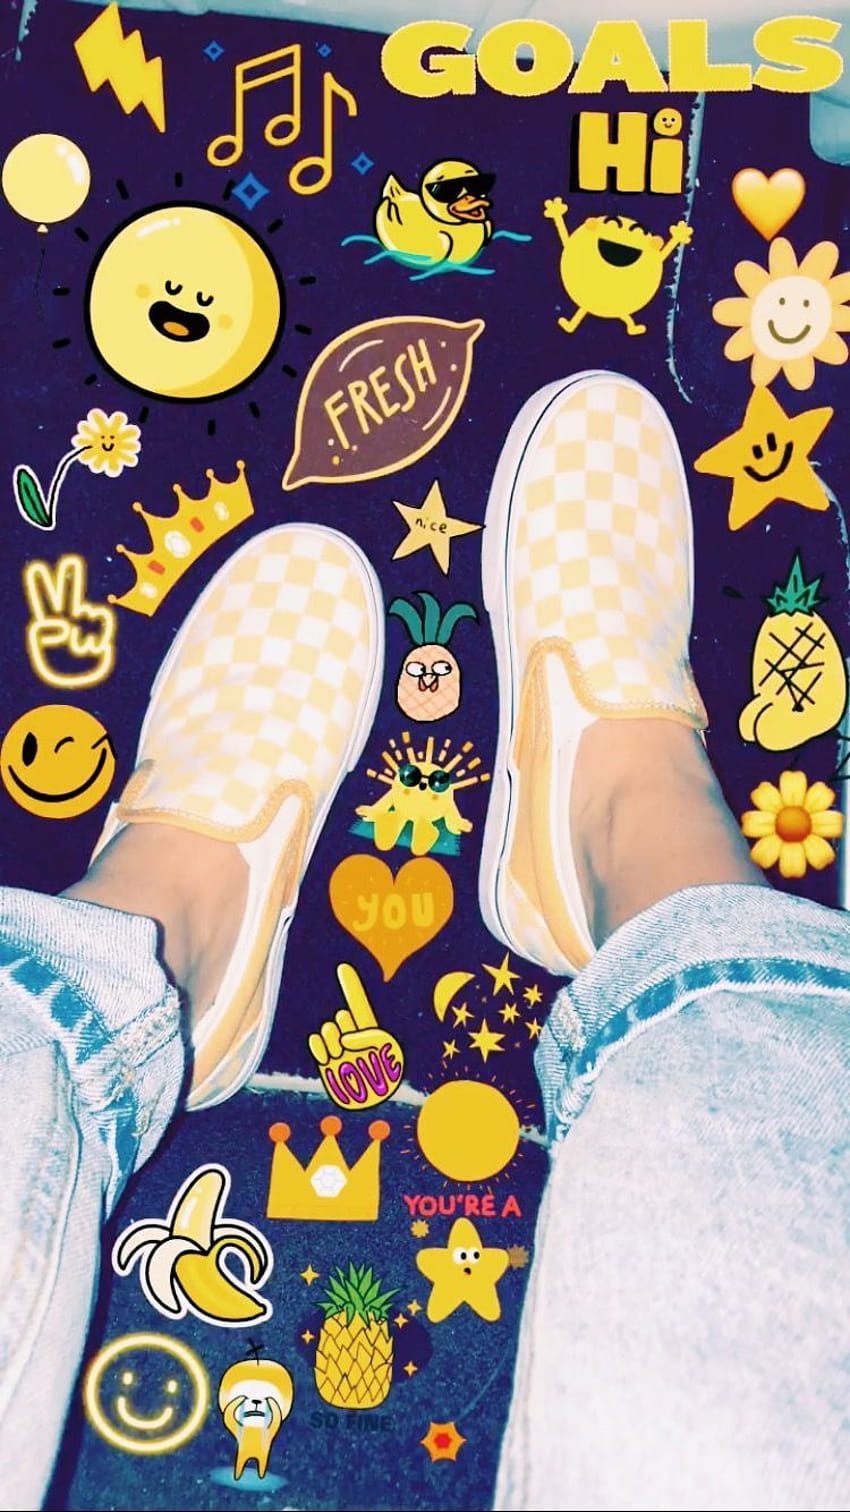 A pair of white shoes with yellow and white checkerboard pattern - Vans, skate, skater